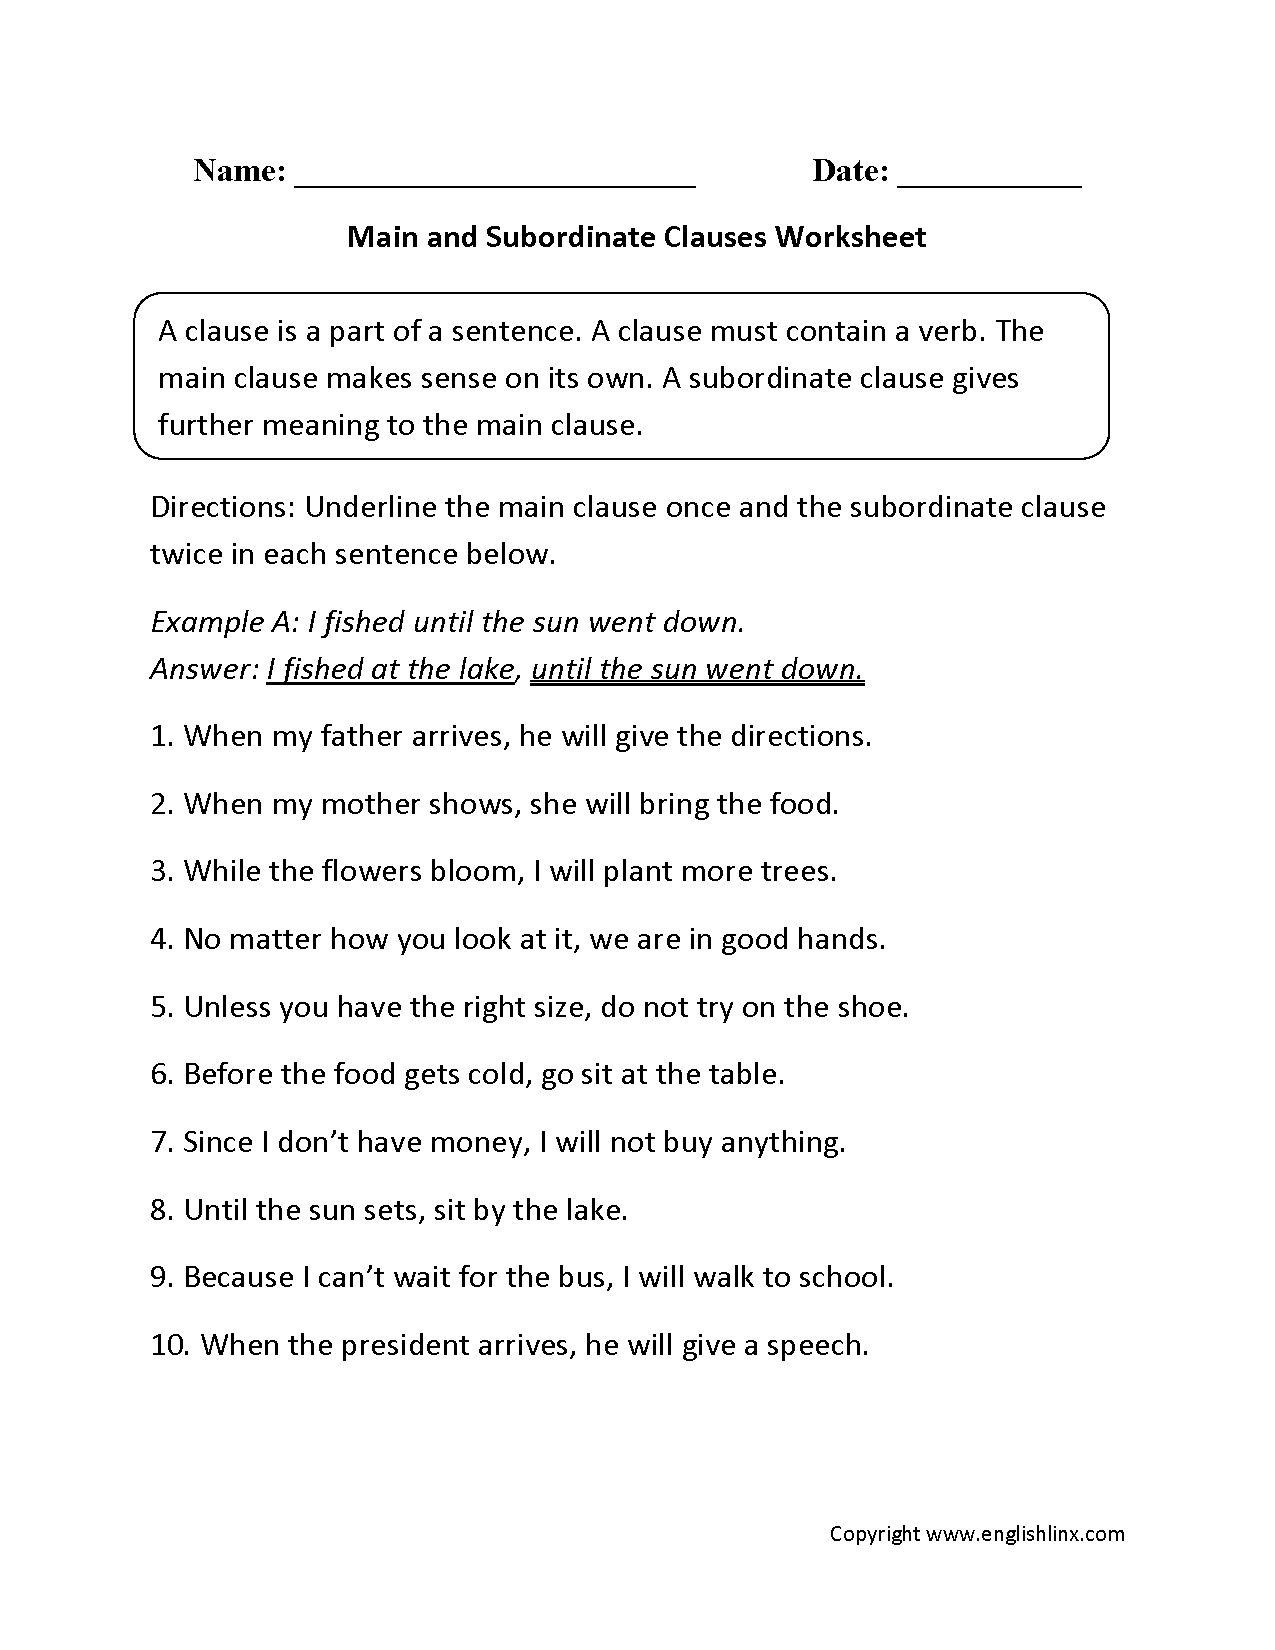 Find The Subordinate Clause Worksheet Answers